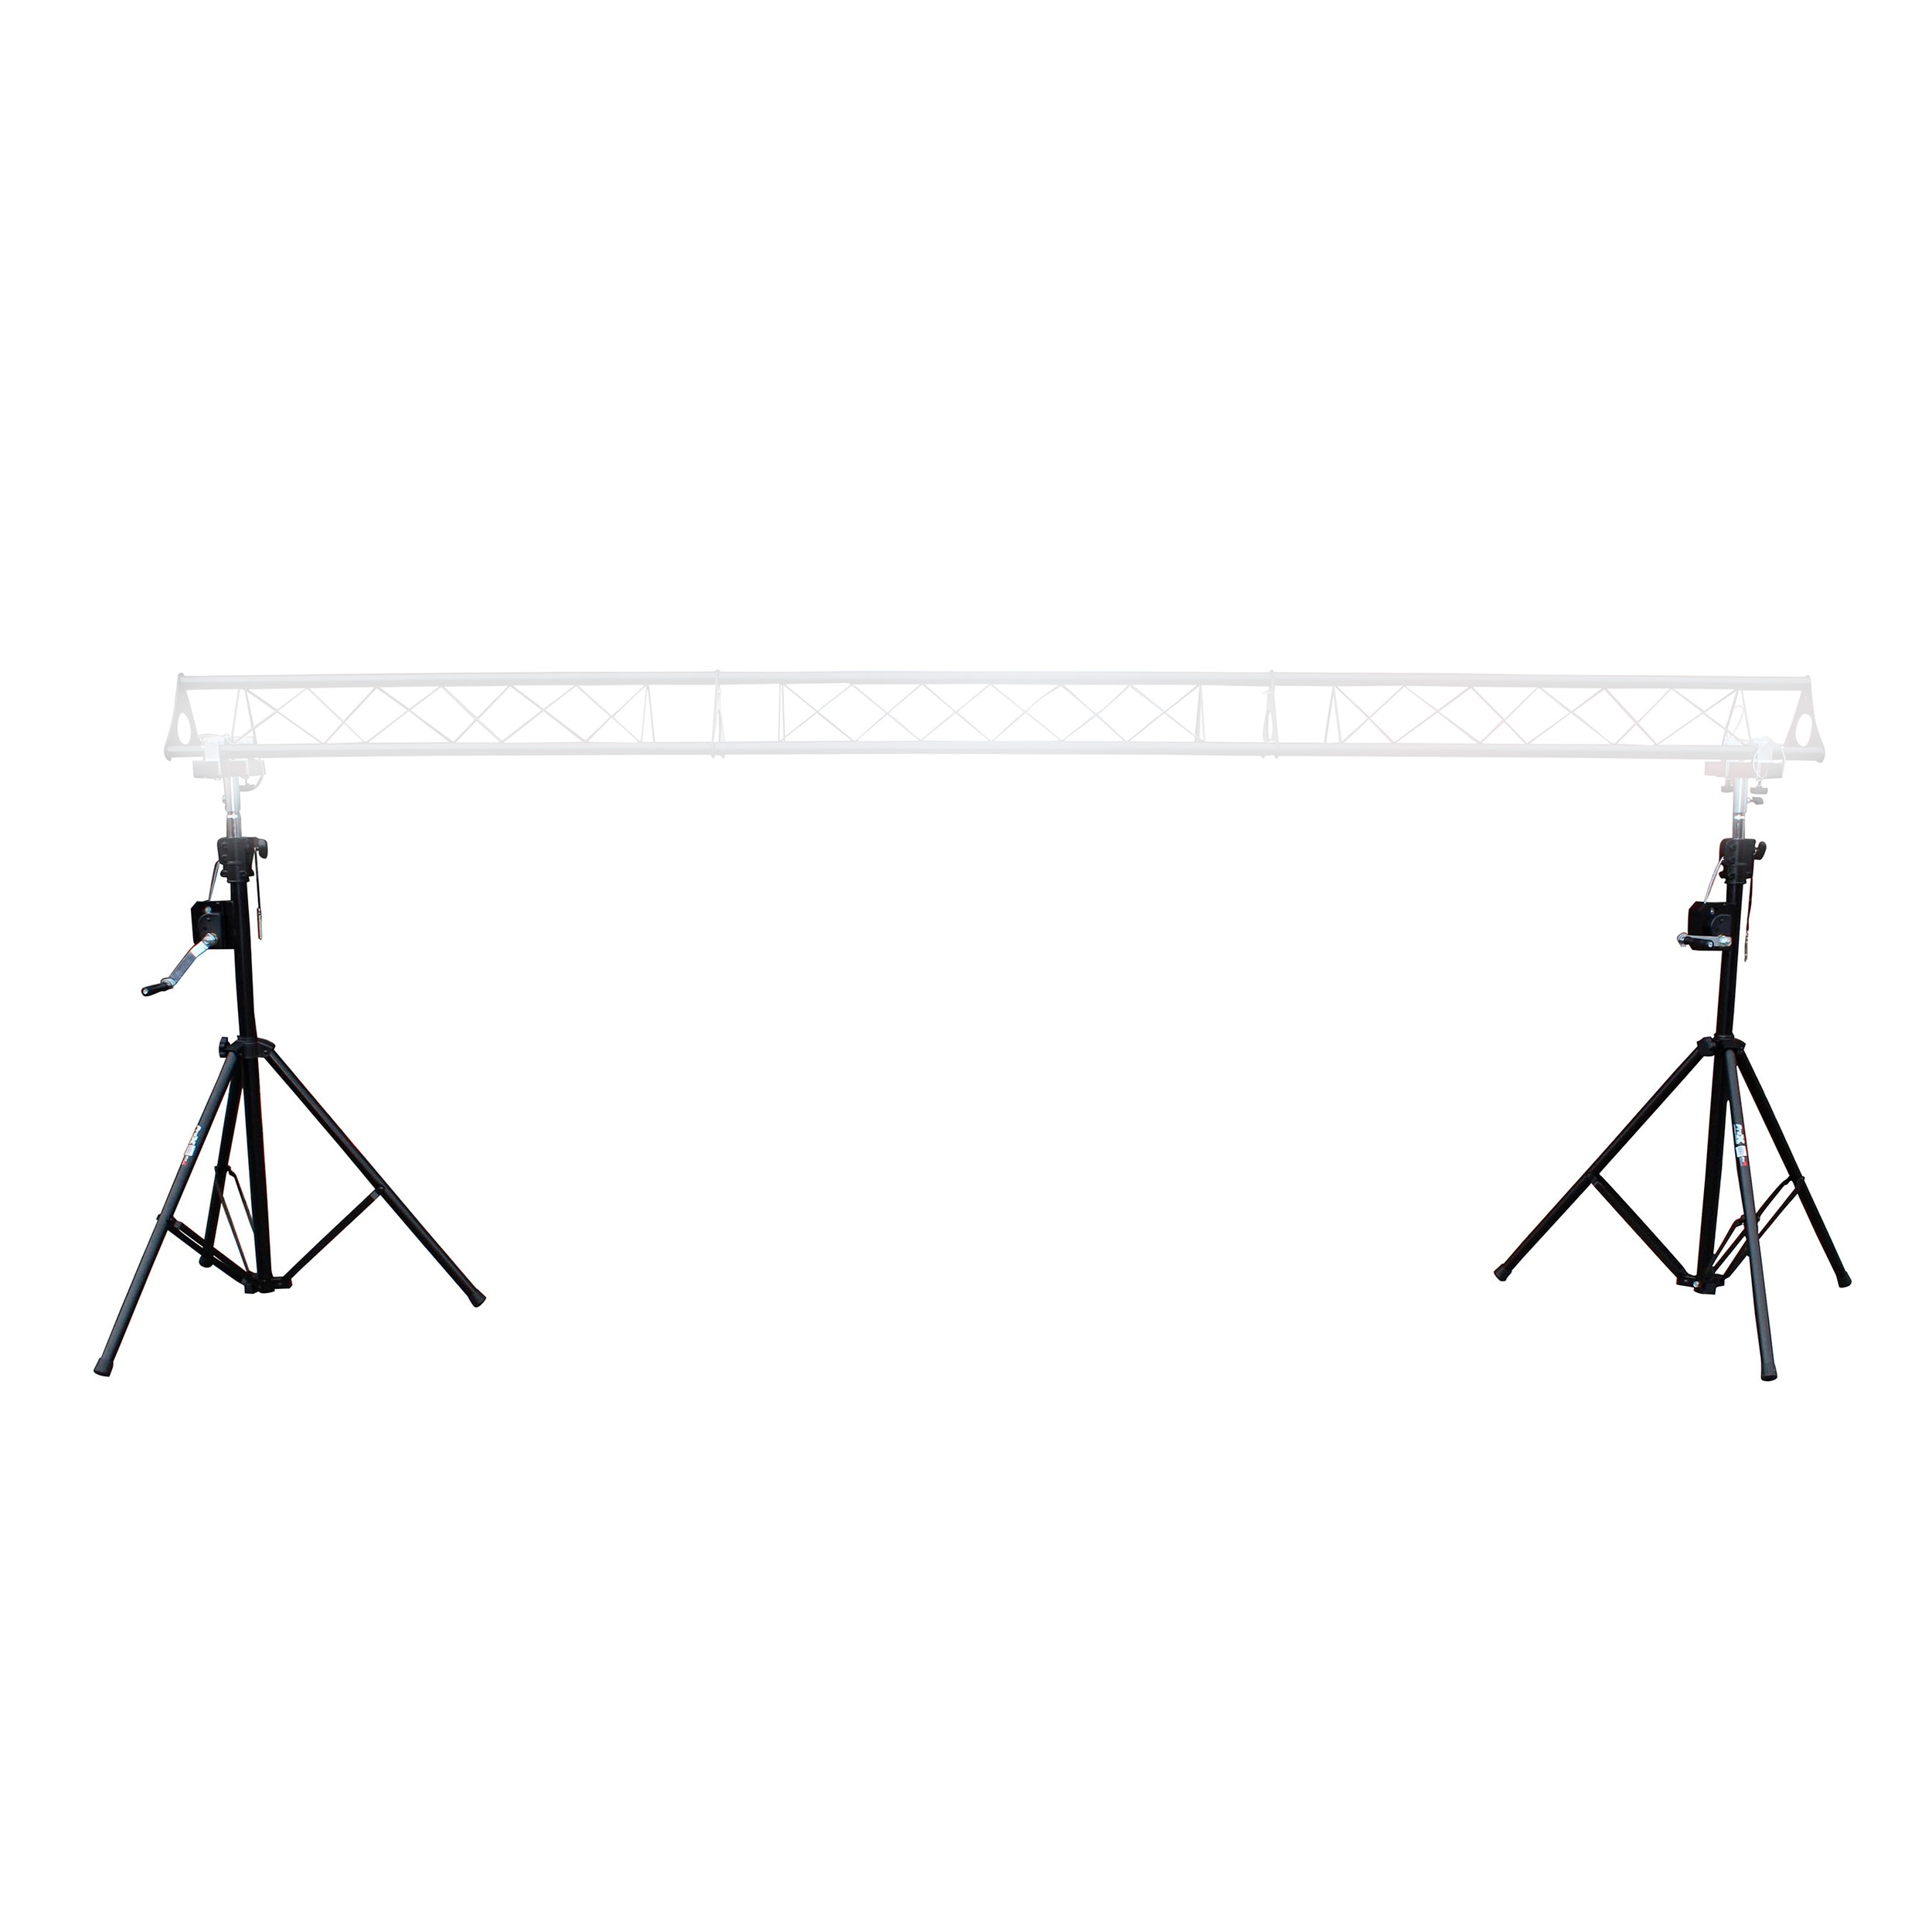 Pair of Two 9.5 Ft 3.5 M Triangle Truss DJ Lighting Crank Up Stands